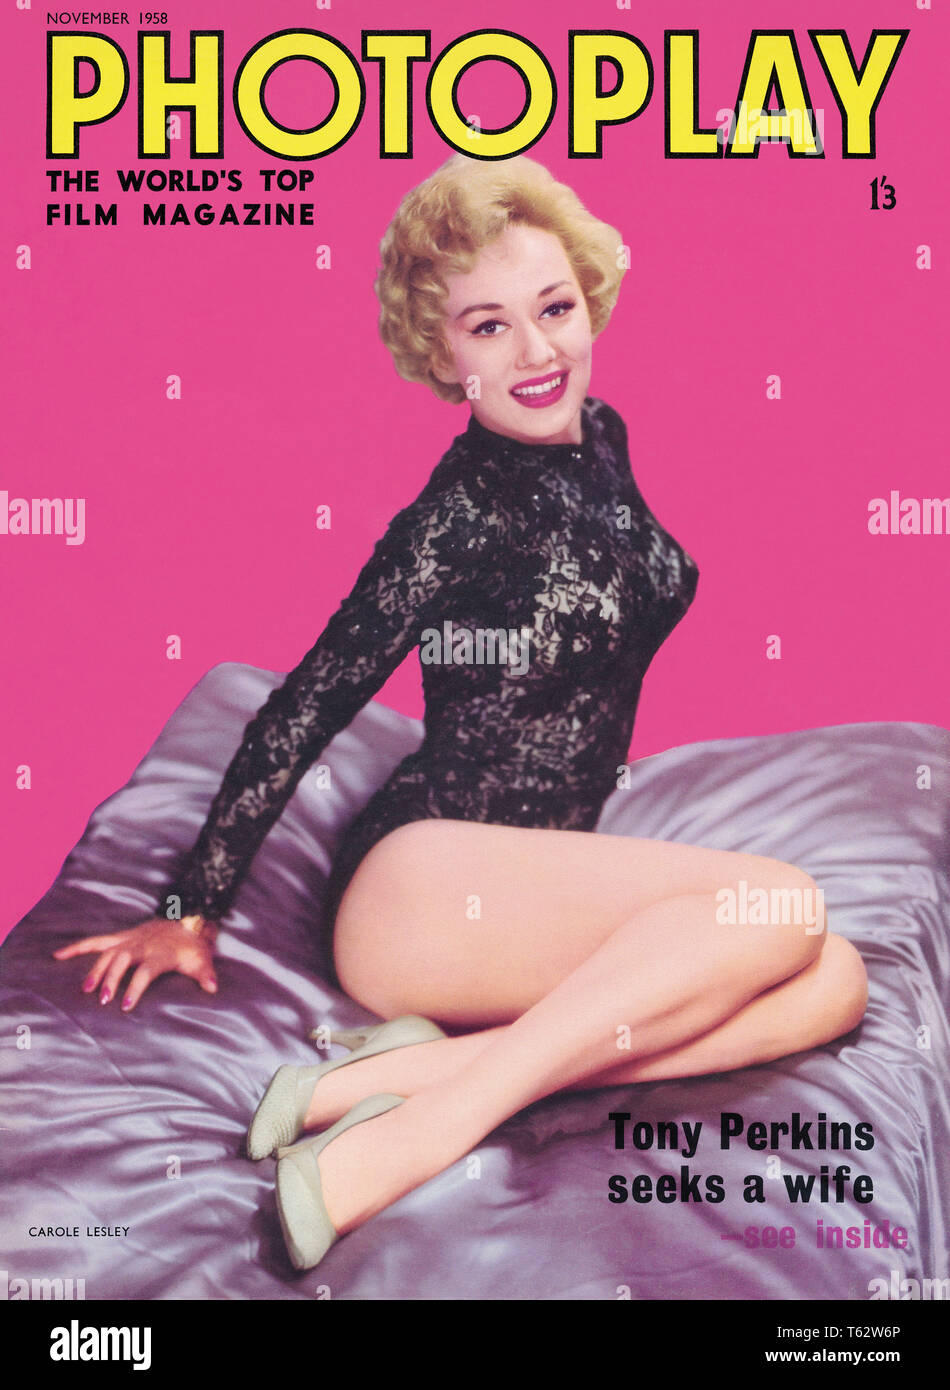 Front cover of the British edition of Photoplay magazine for November 1958, featuring actress Carole Lesley. Stock Photo